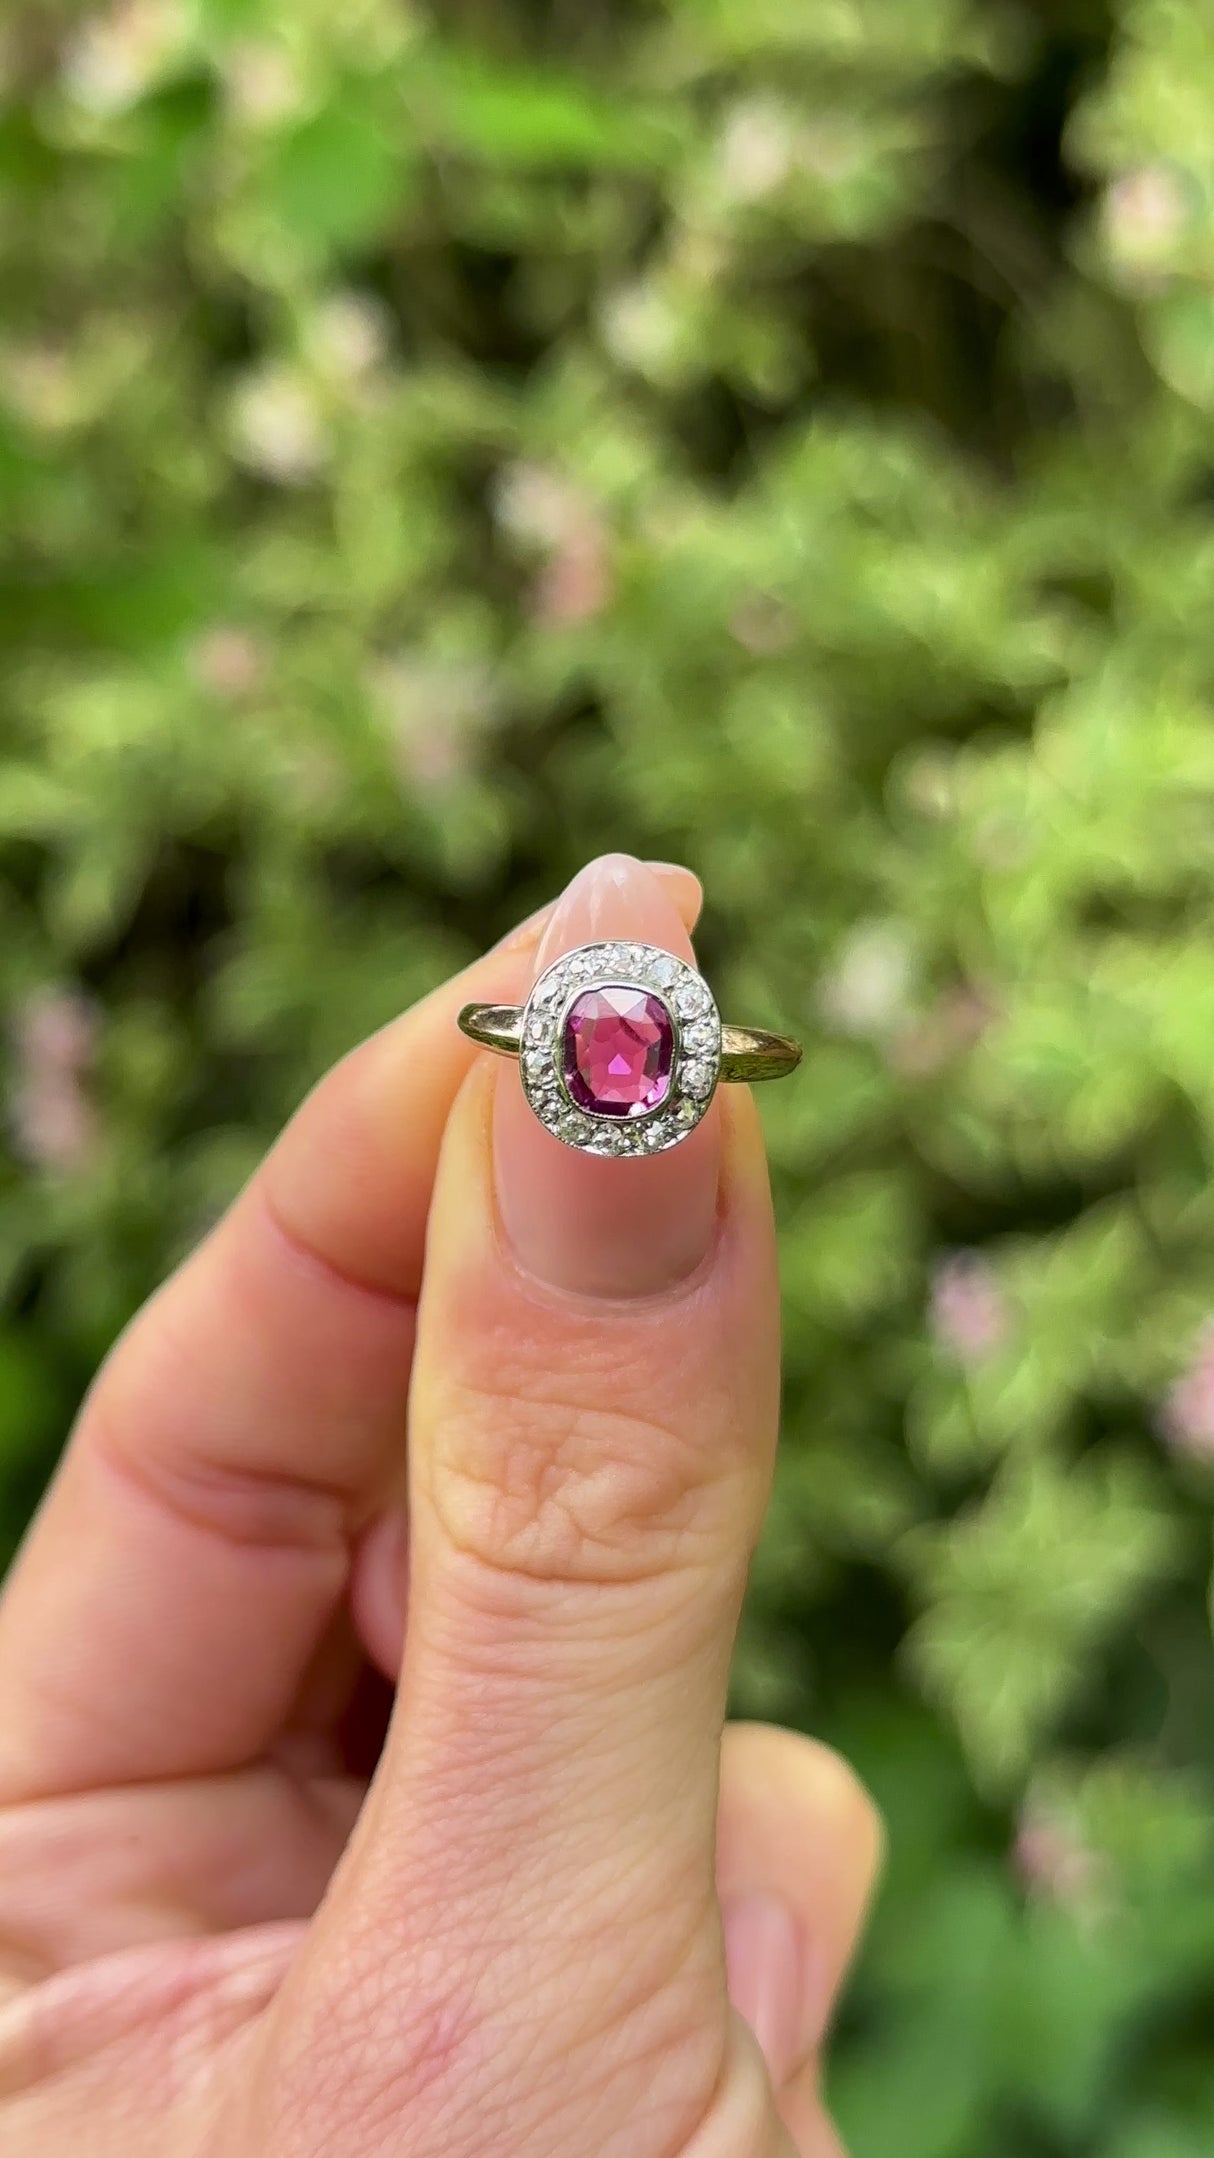 Antique, Edwardian pink sapphire and diamond cluster ring, 18ct yellow gold